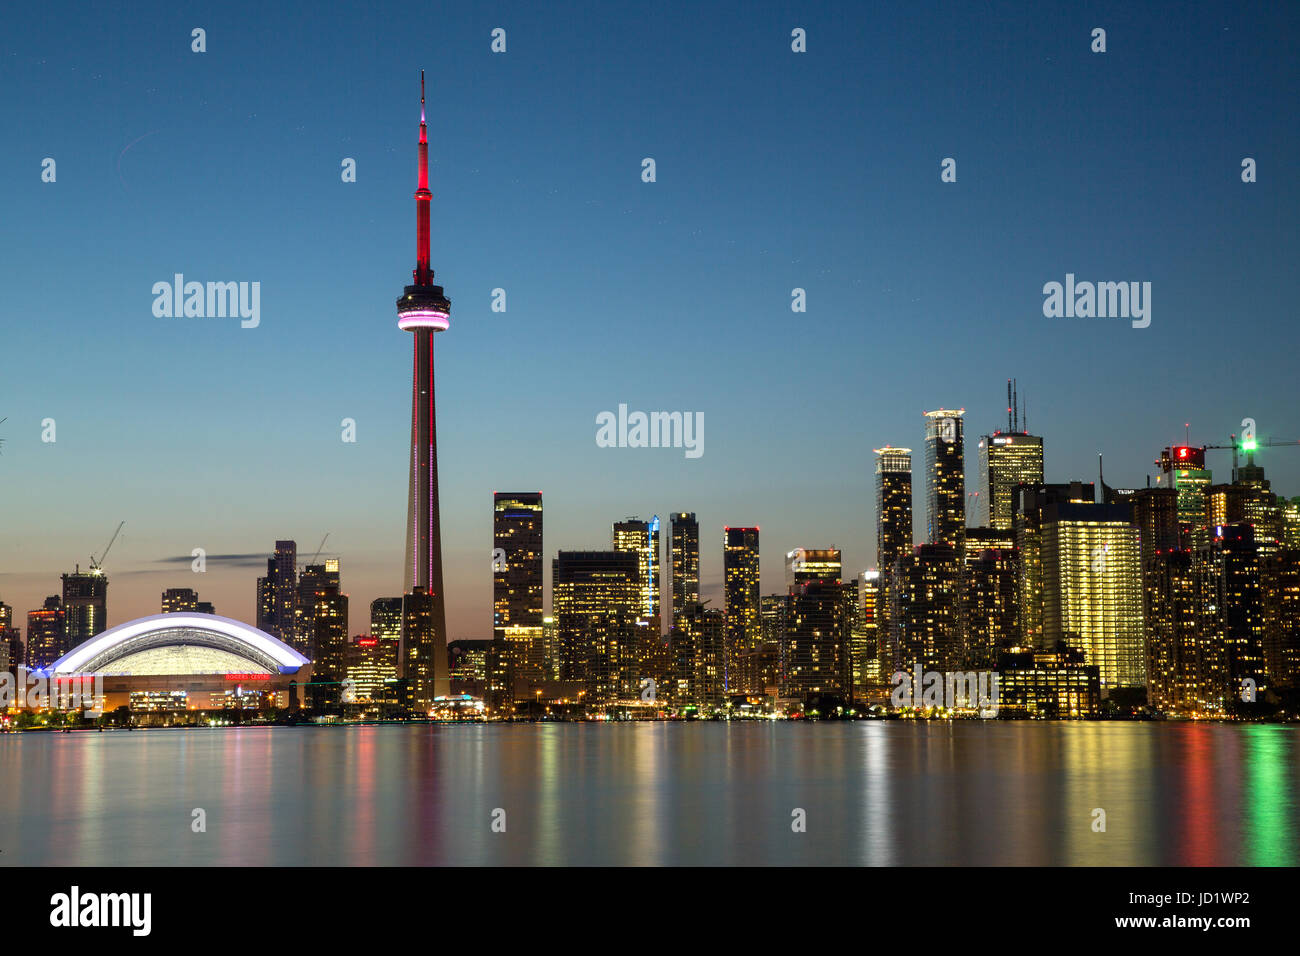 Il CN(Canadian National) Tower a Toronto, Ontario Canada Foto Stock